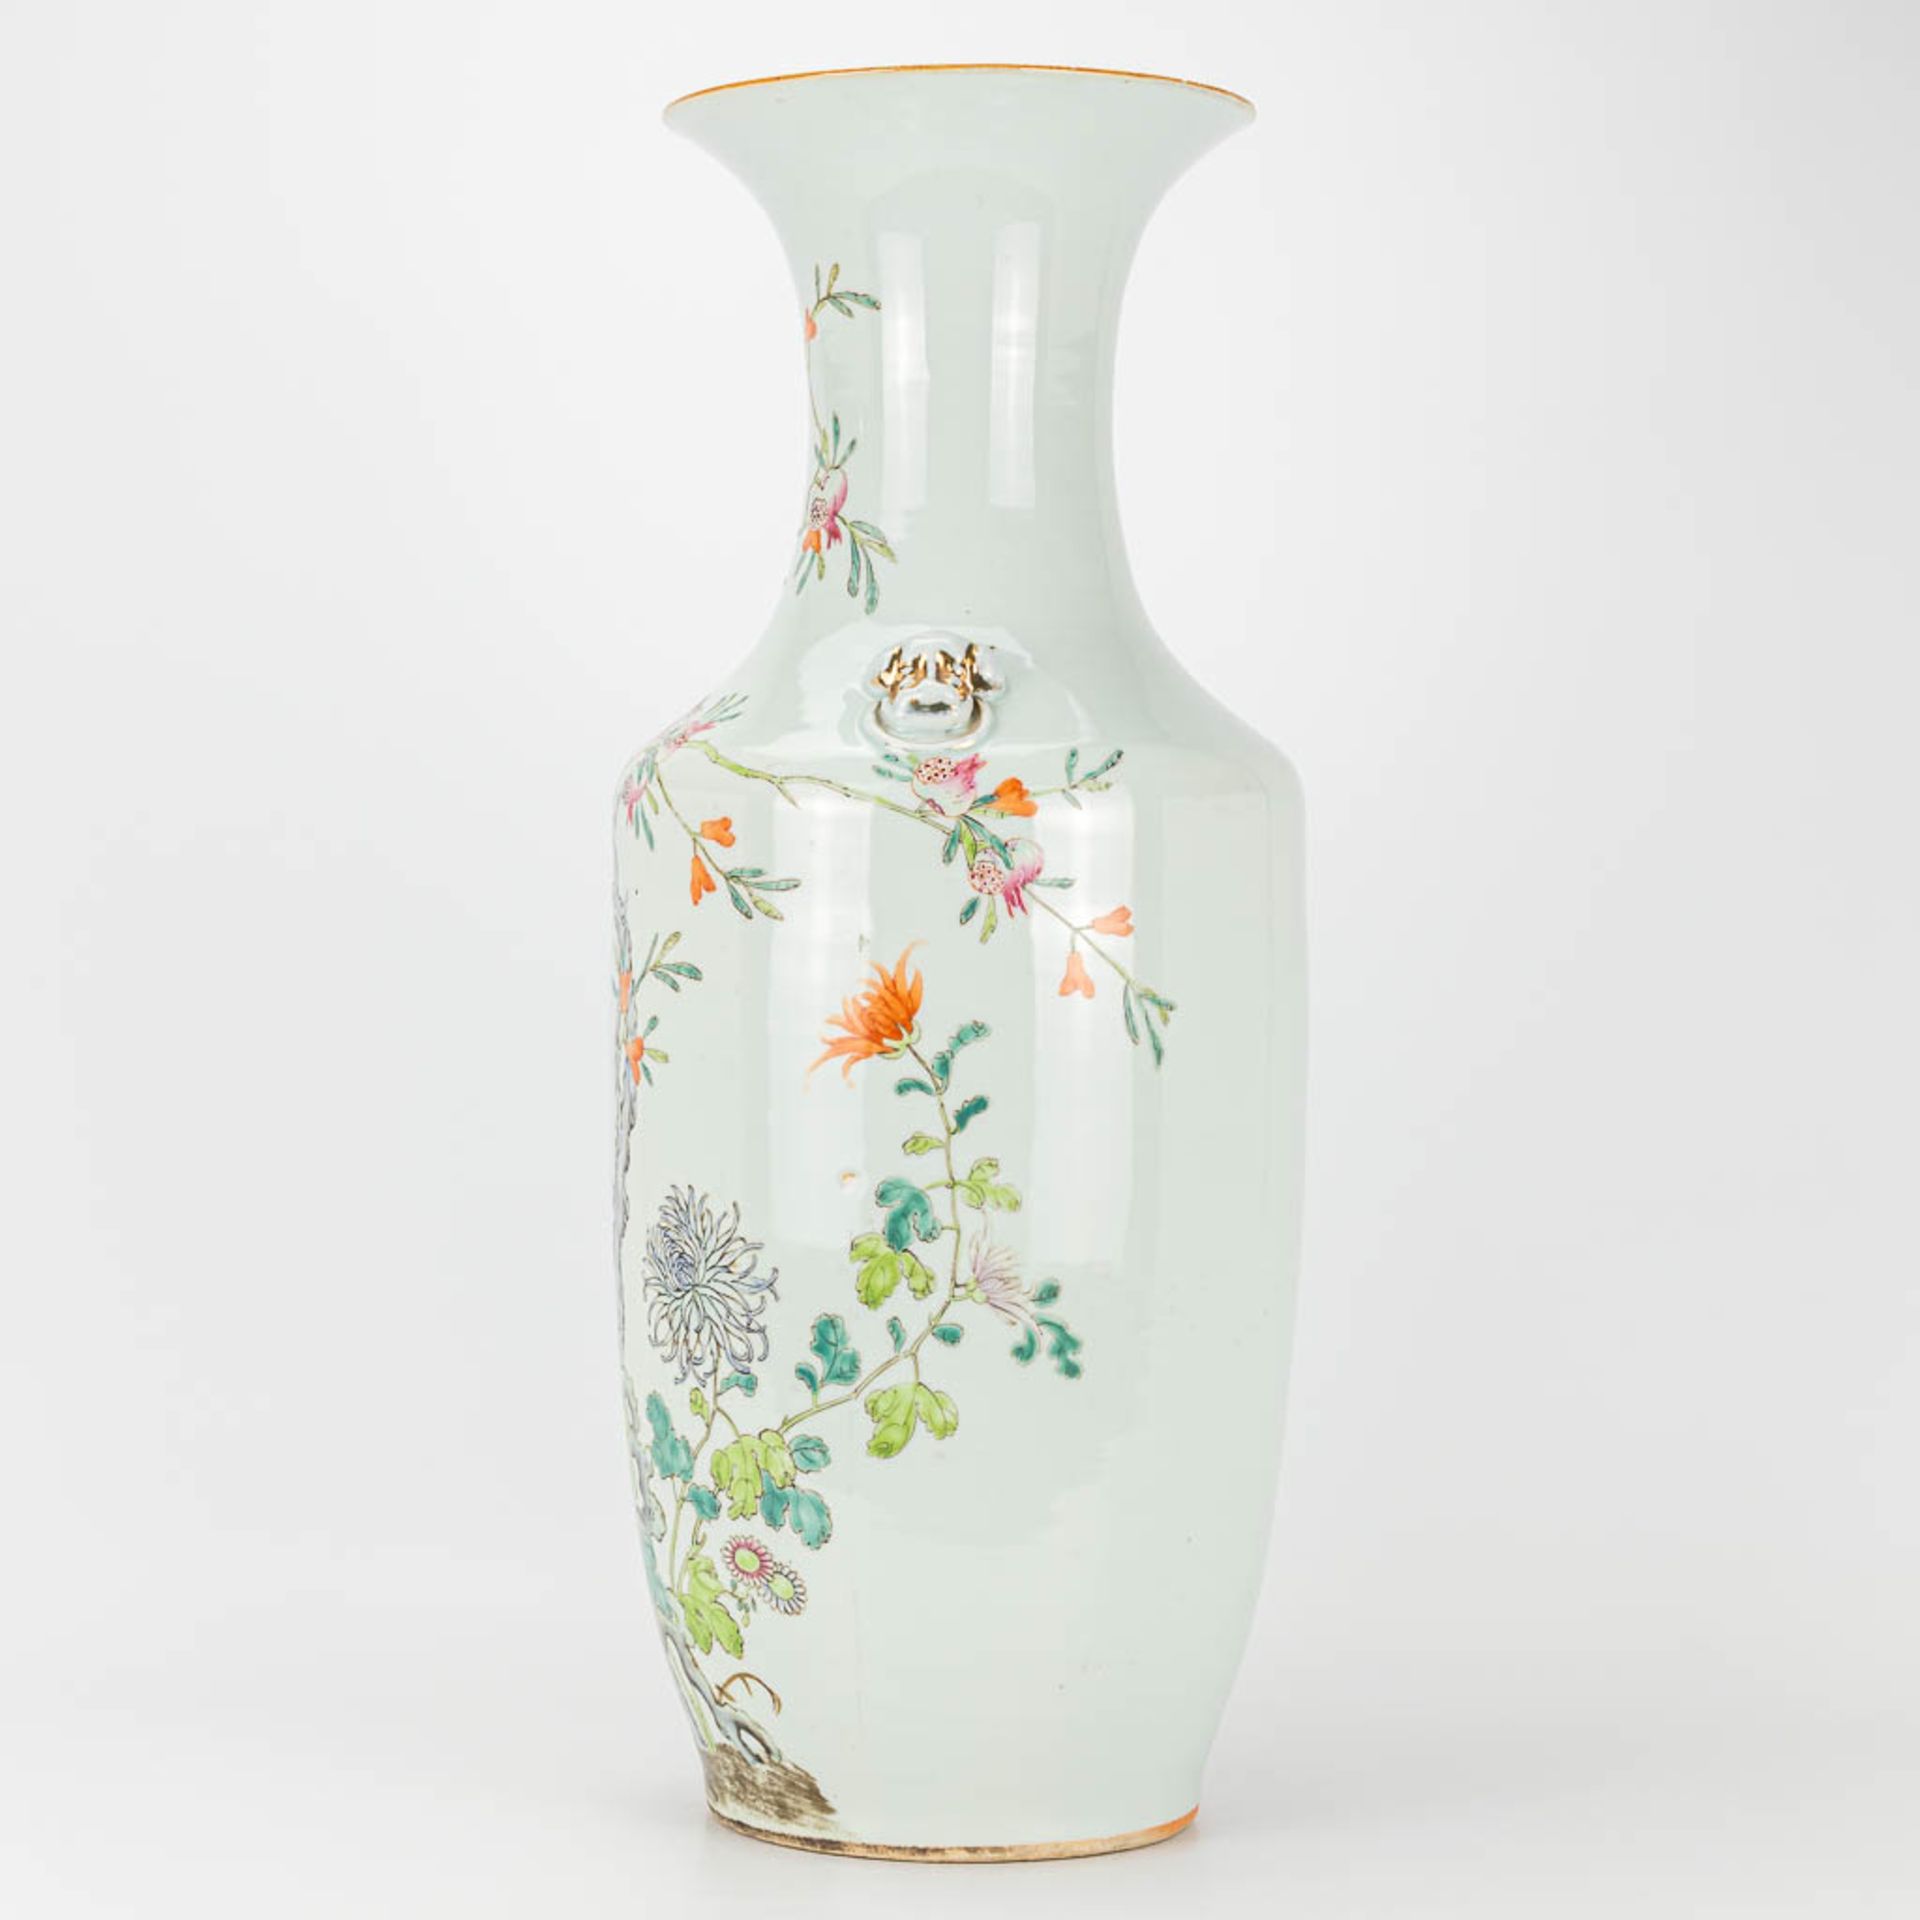 A vase made of Chinese porcelain and decorated with roses and bats. 19th century. - Image 4 of 13